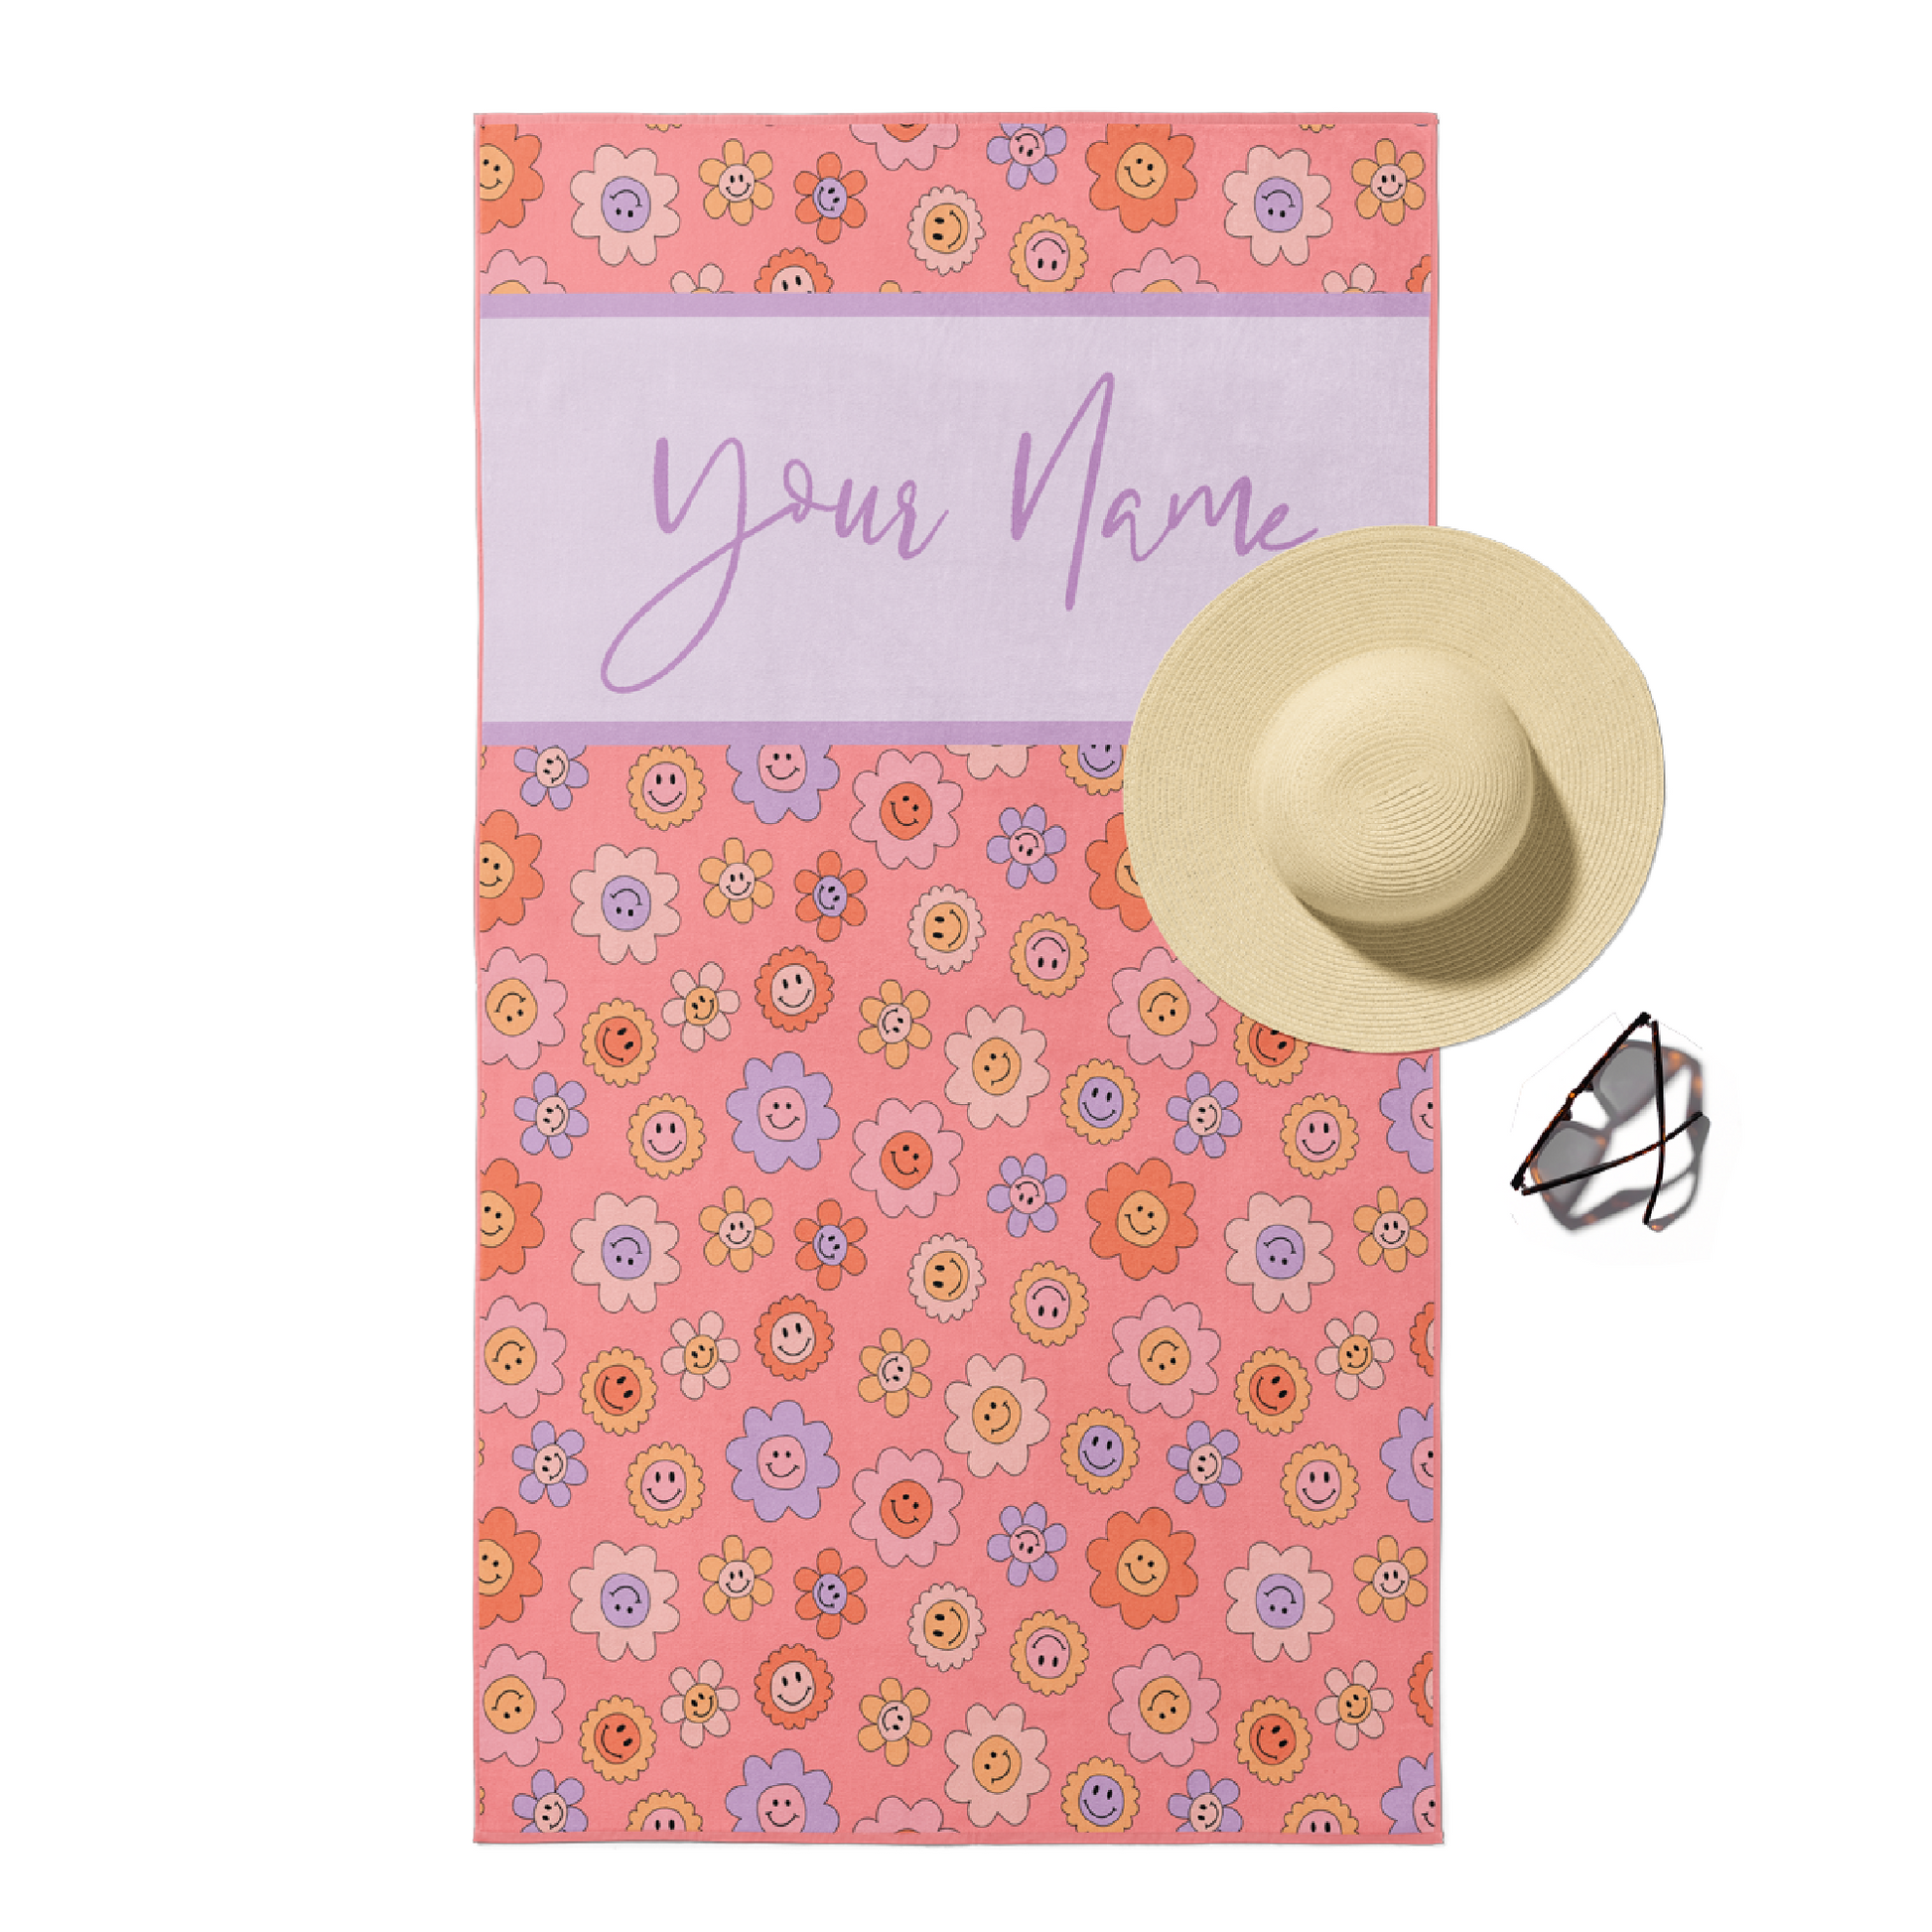 Beach towel in pink happy floral print with custom purple text.